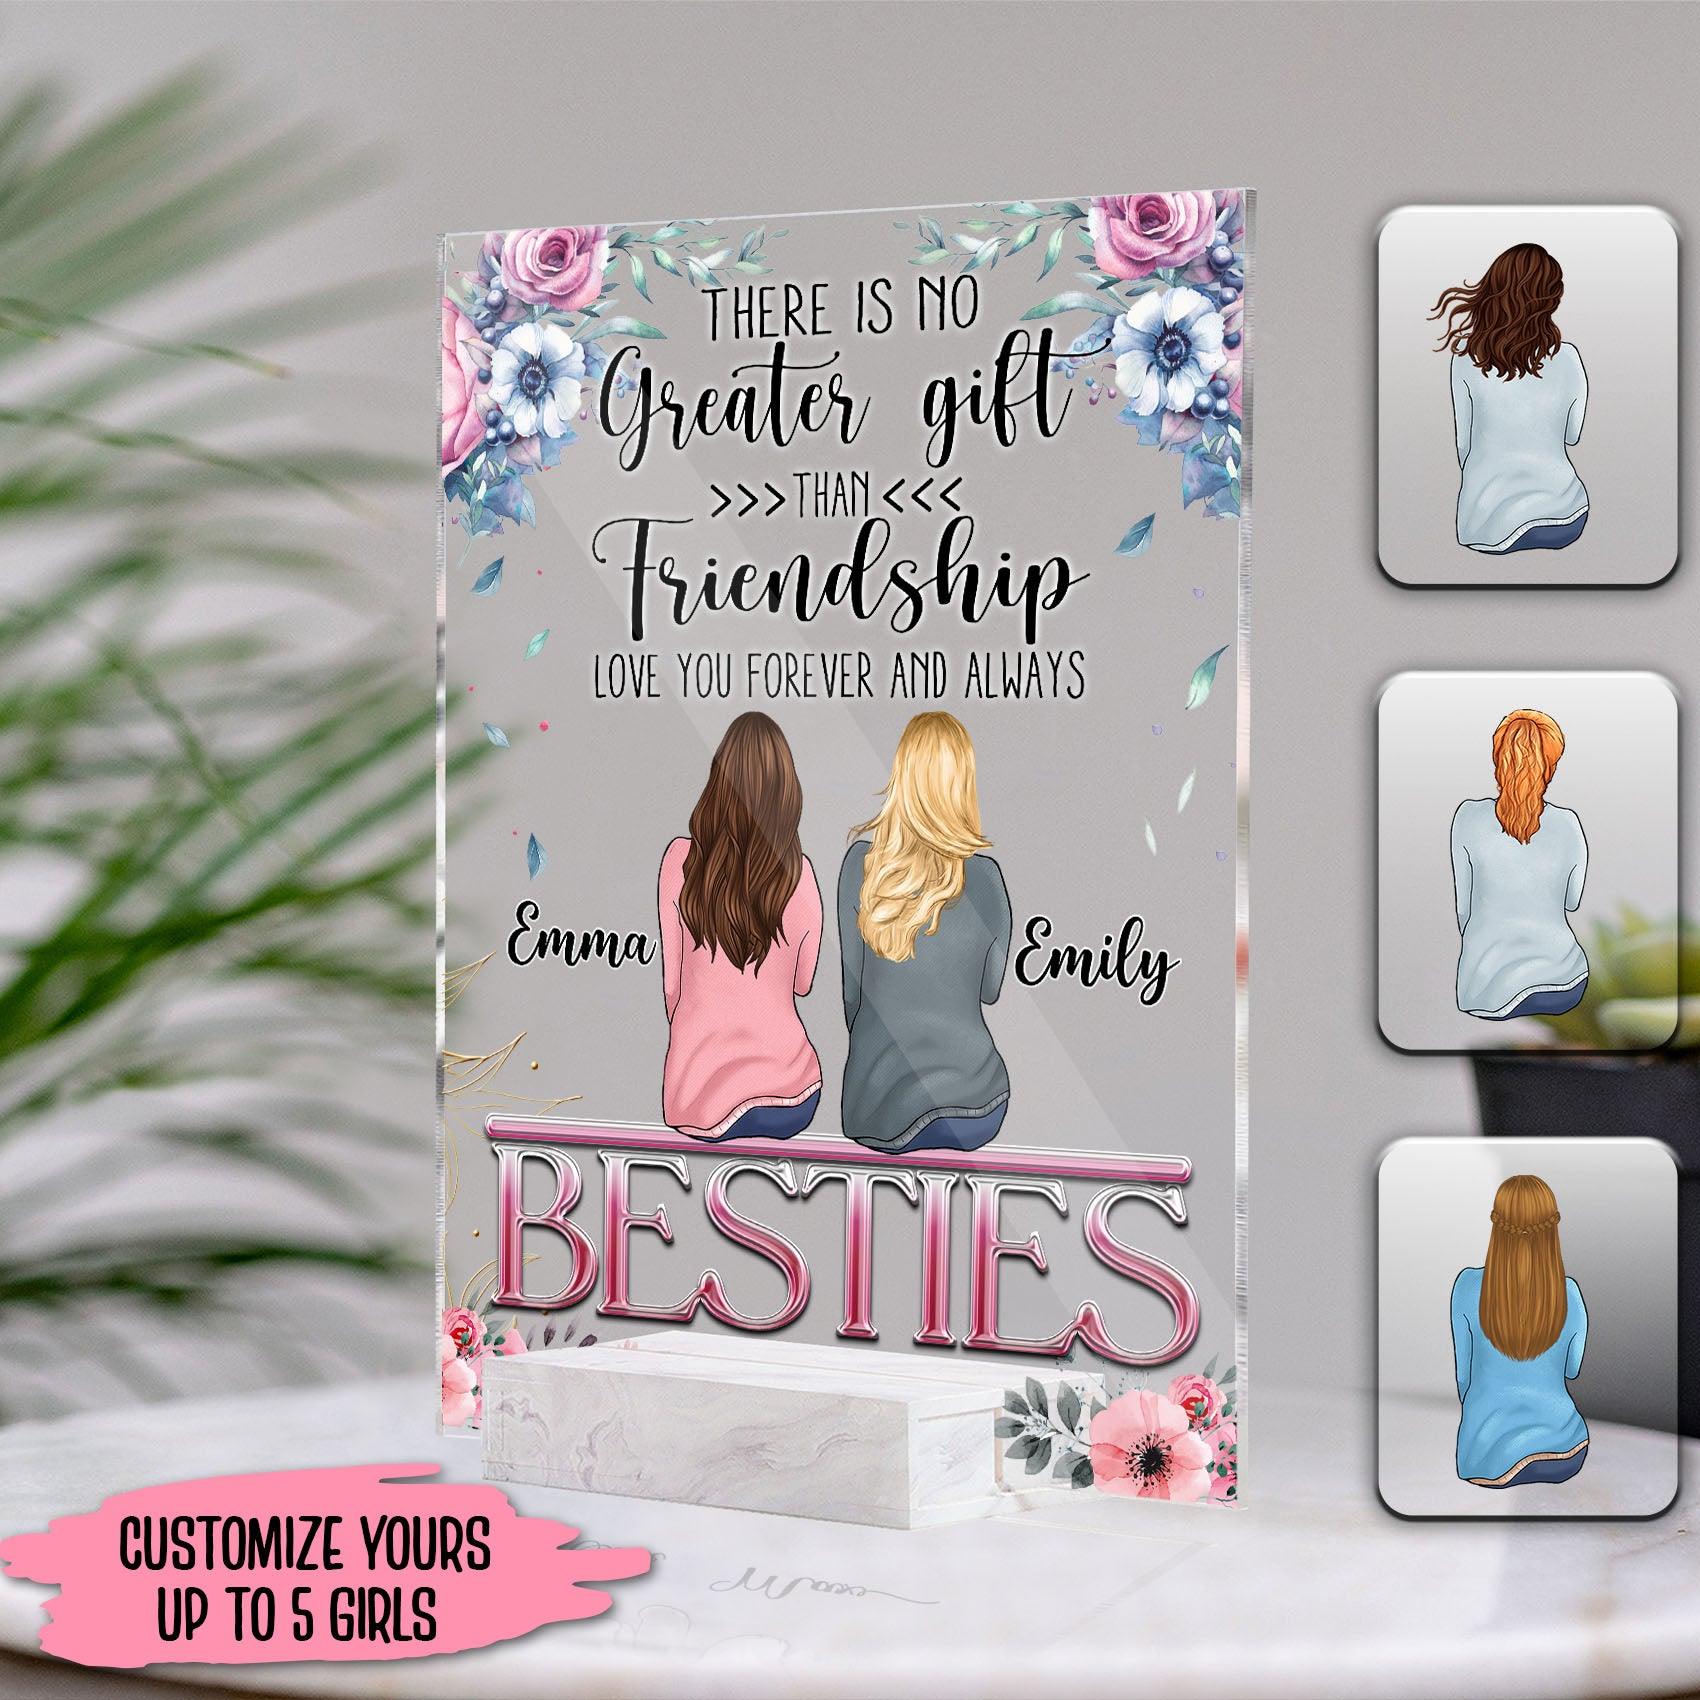 Best Friend Gifts - Christmas Gifts, Birthday Gifts for Best Friend, B